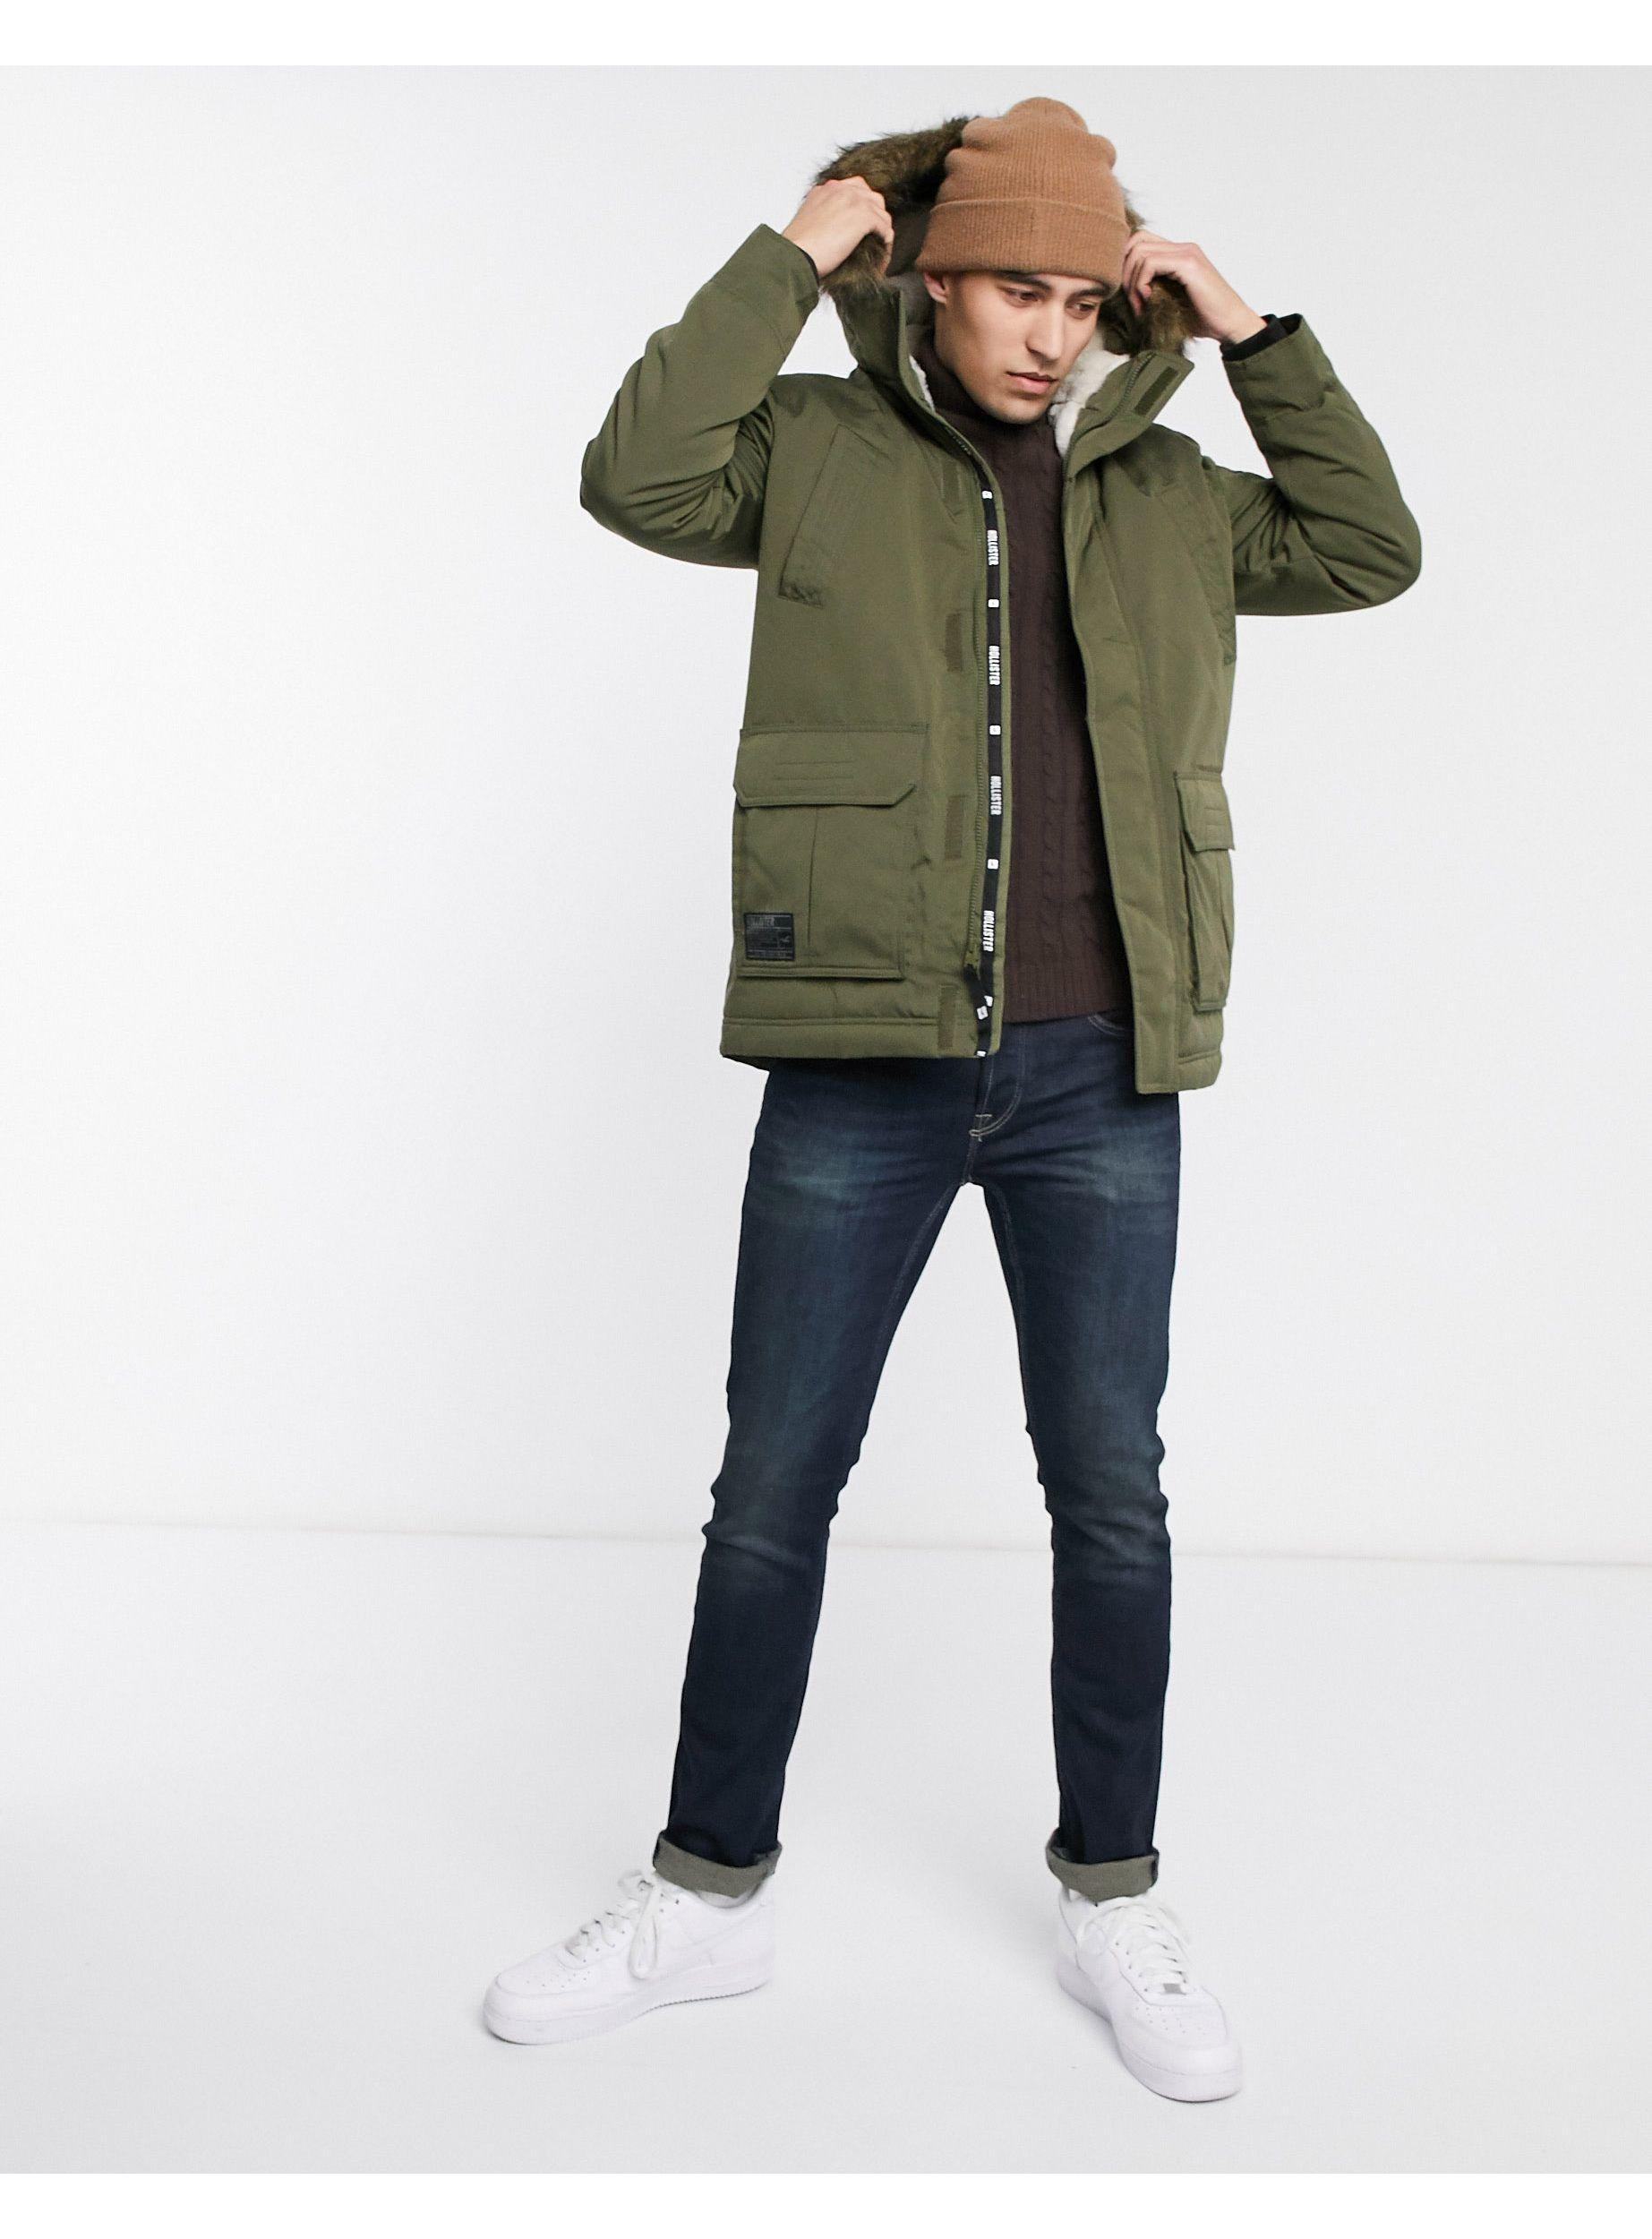 Hollister All-Weather Winter Parka